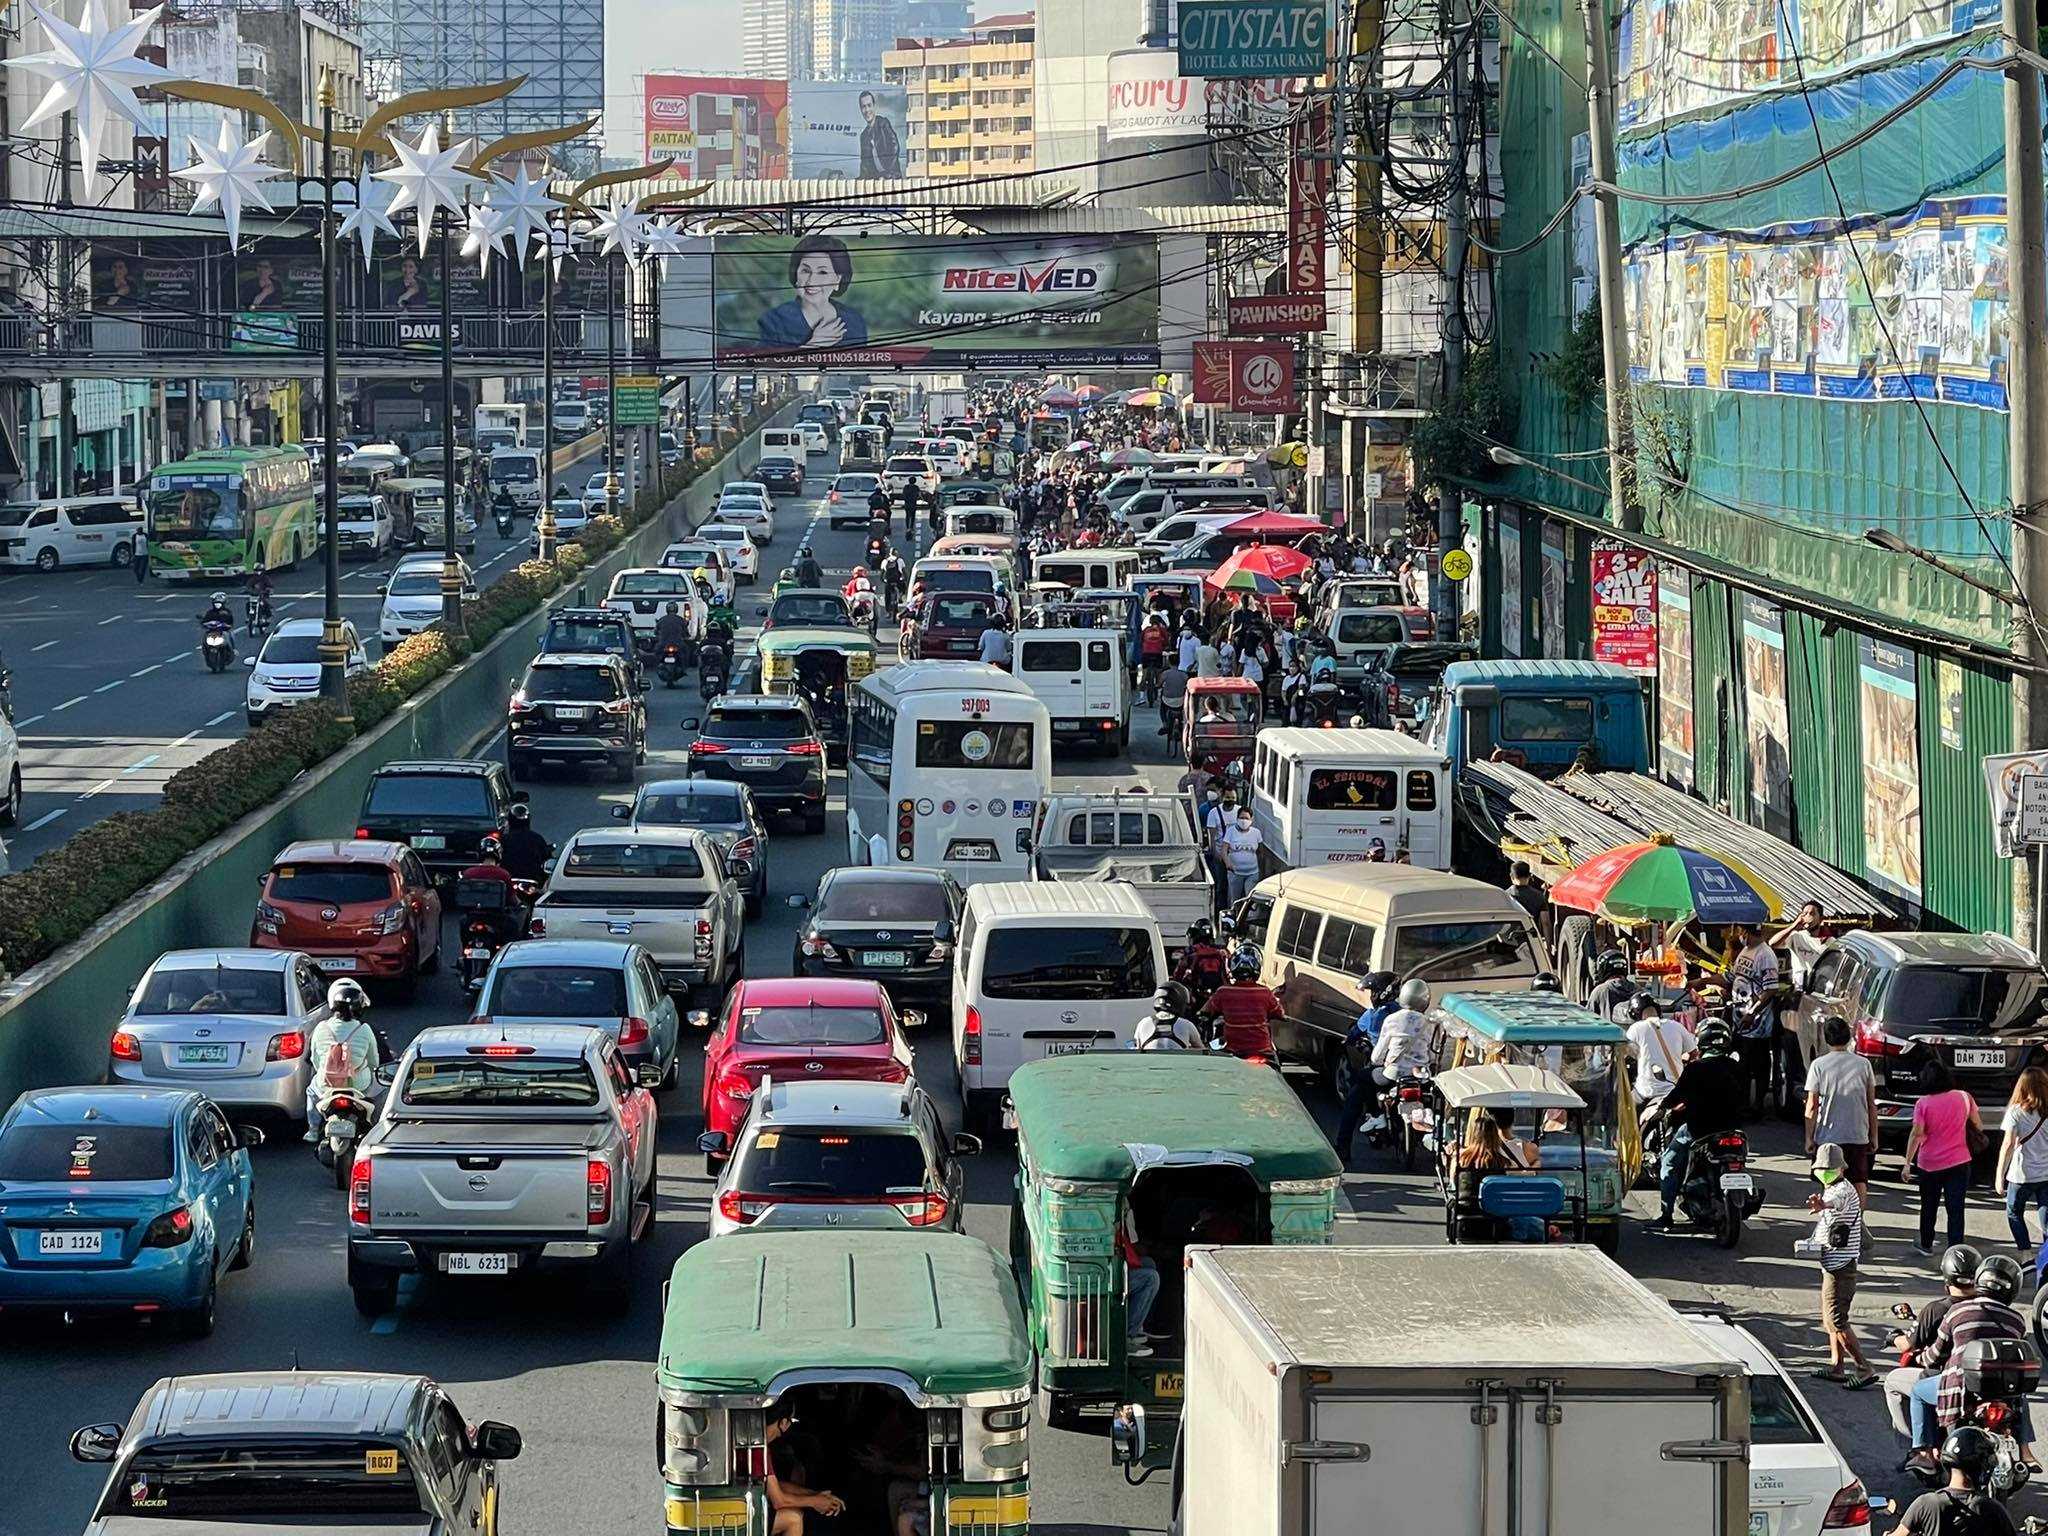 LTFRB's fuel subsidy program exempted from Comelec spending ban